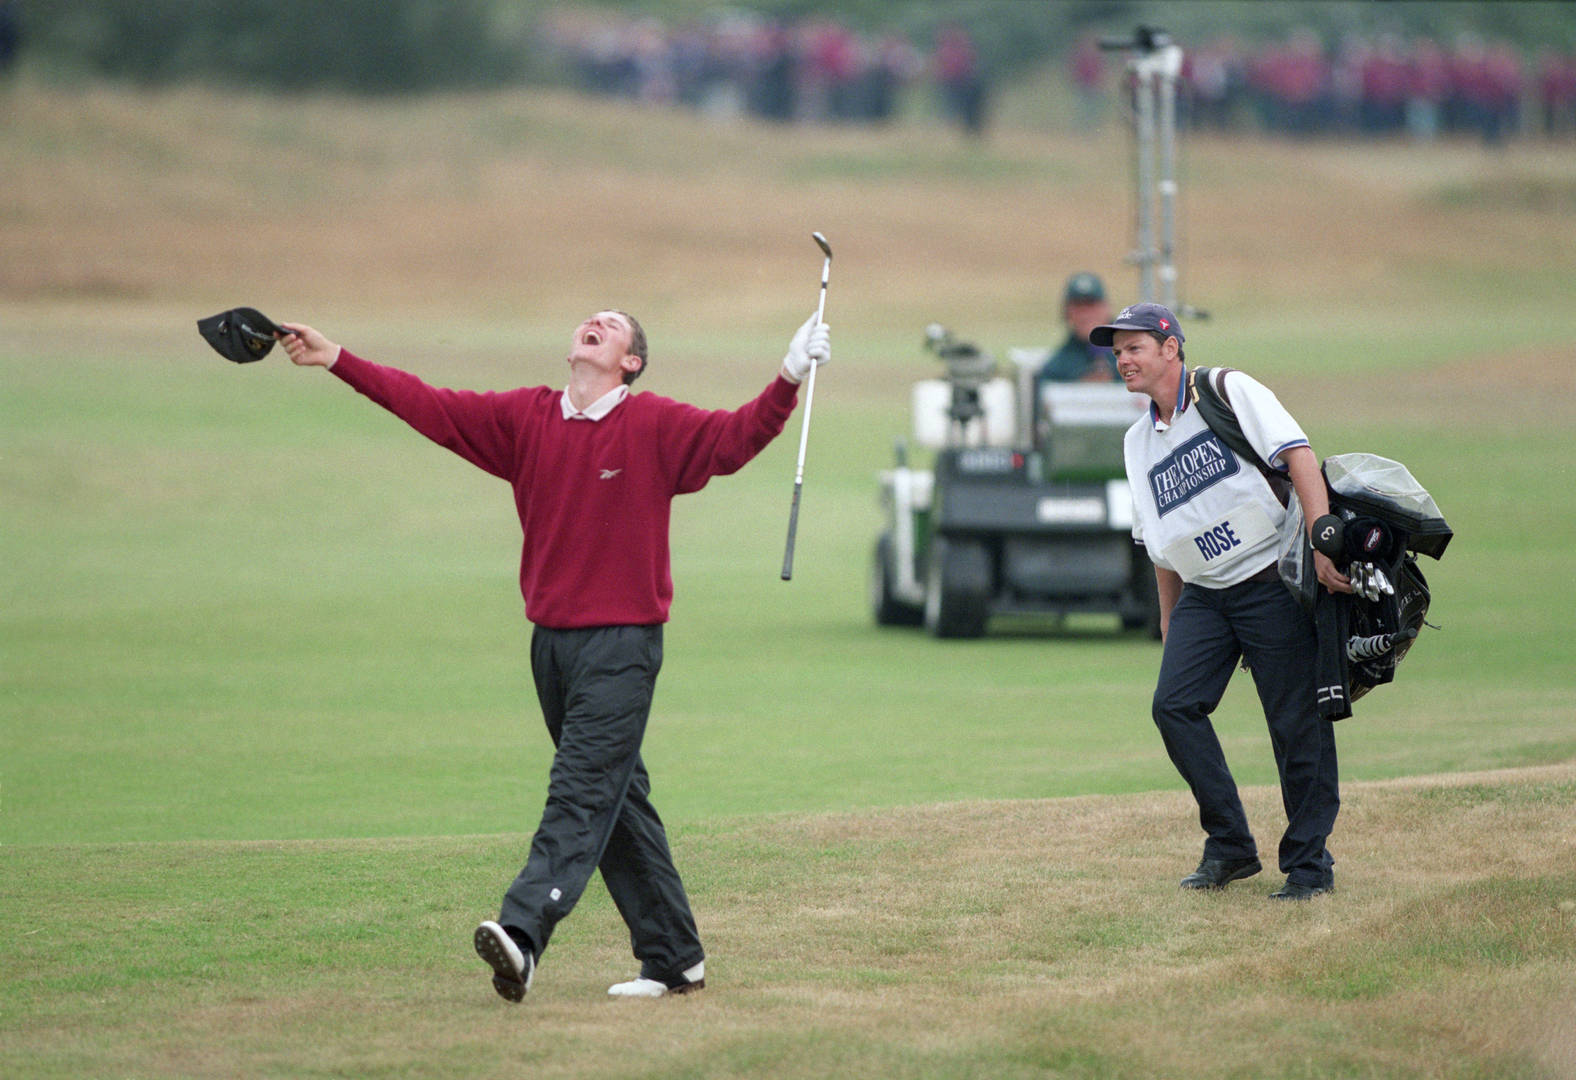 Justin Rose makes eagle on 18 at Royal Birkdale to win the Silver Medal, 1998